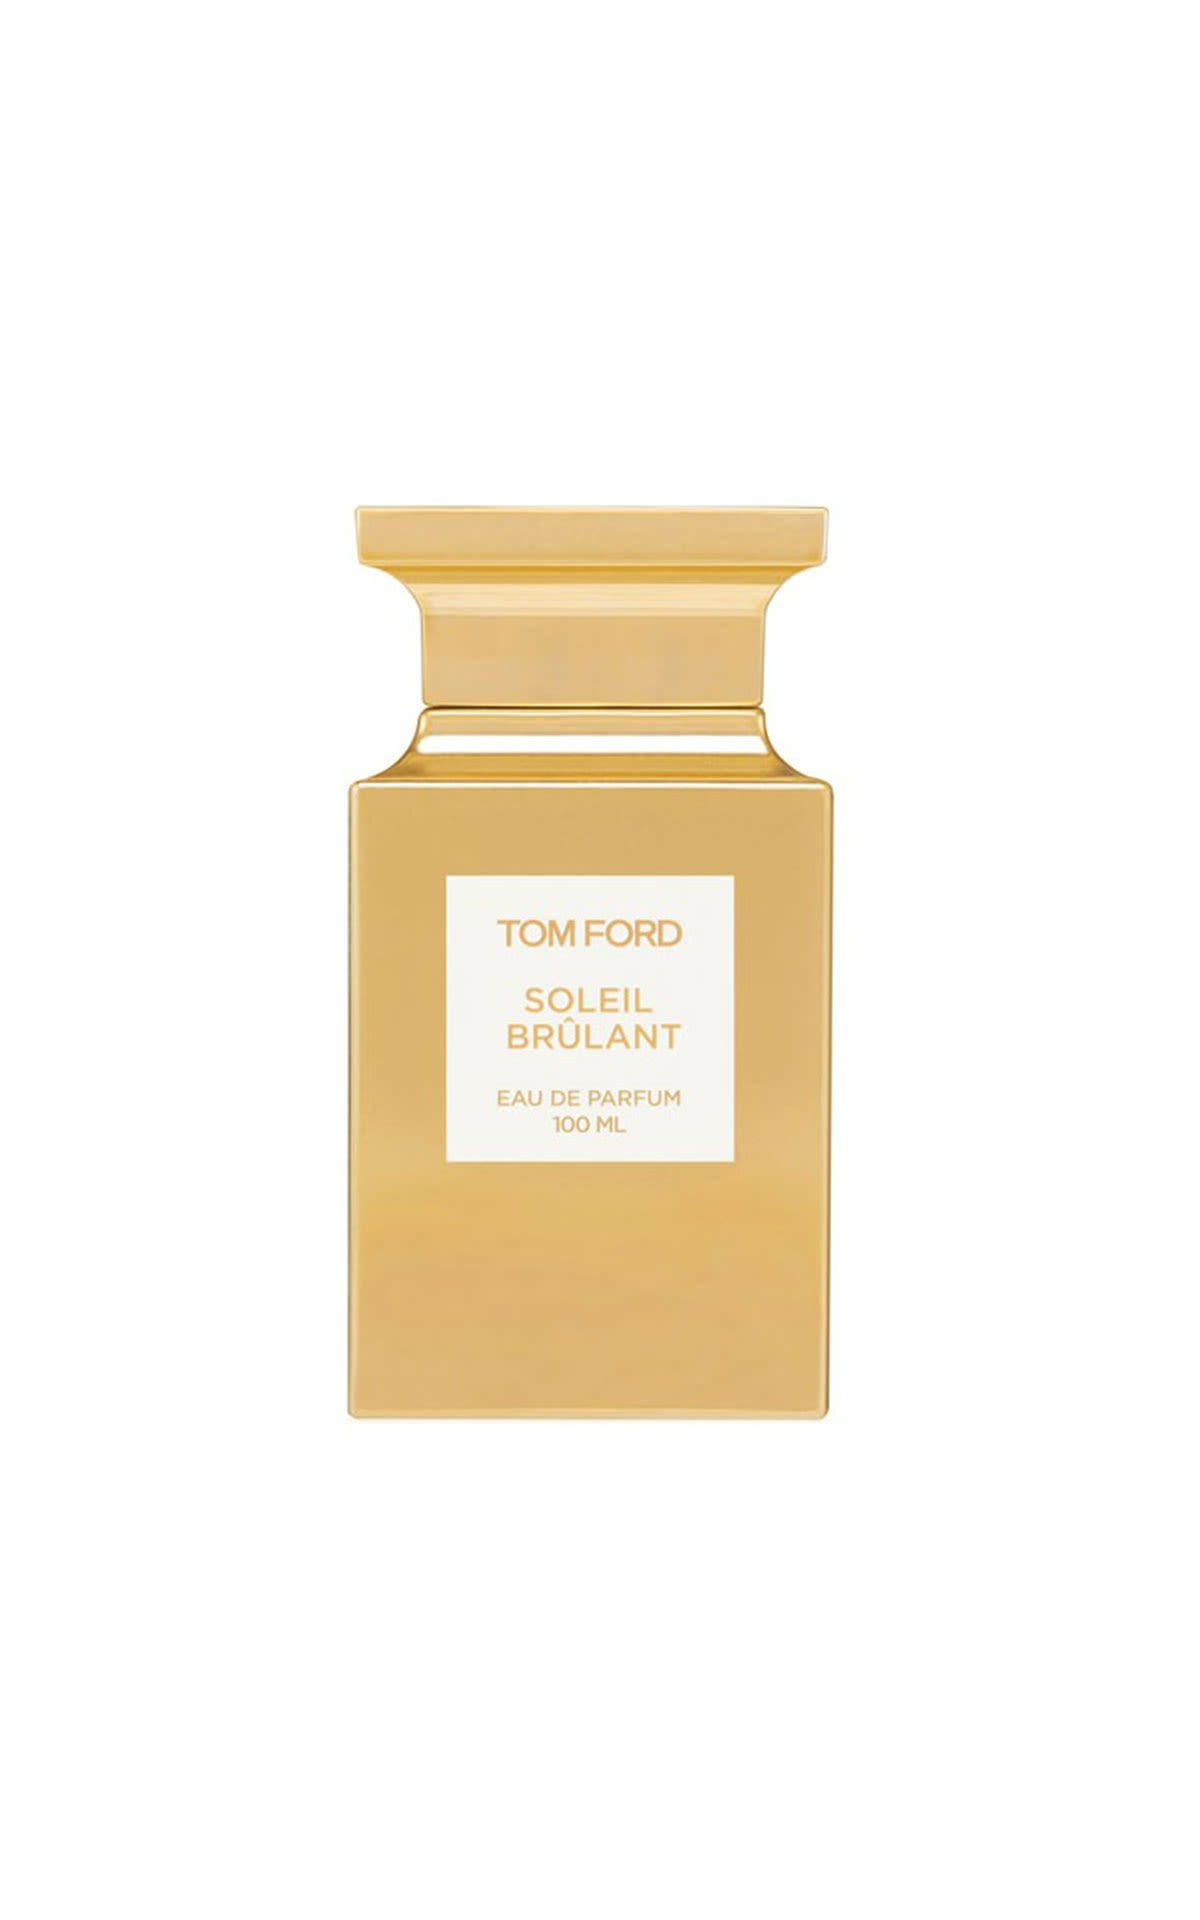 The Cosmetics Company Store Tom Ford Soleil brulant eau de parfum 100ml from Bicester Village